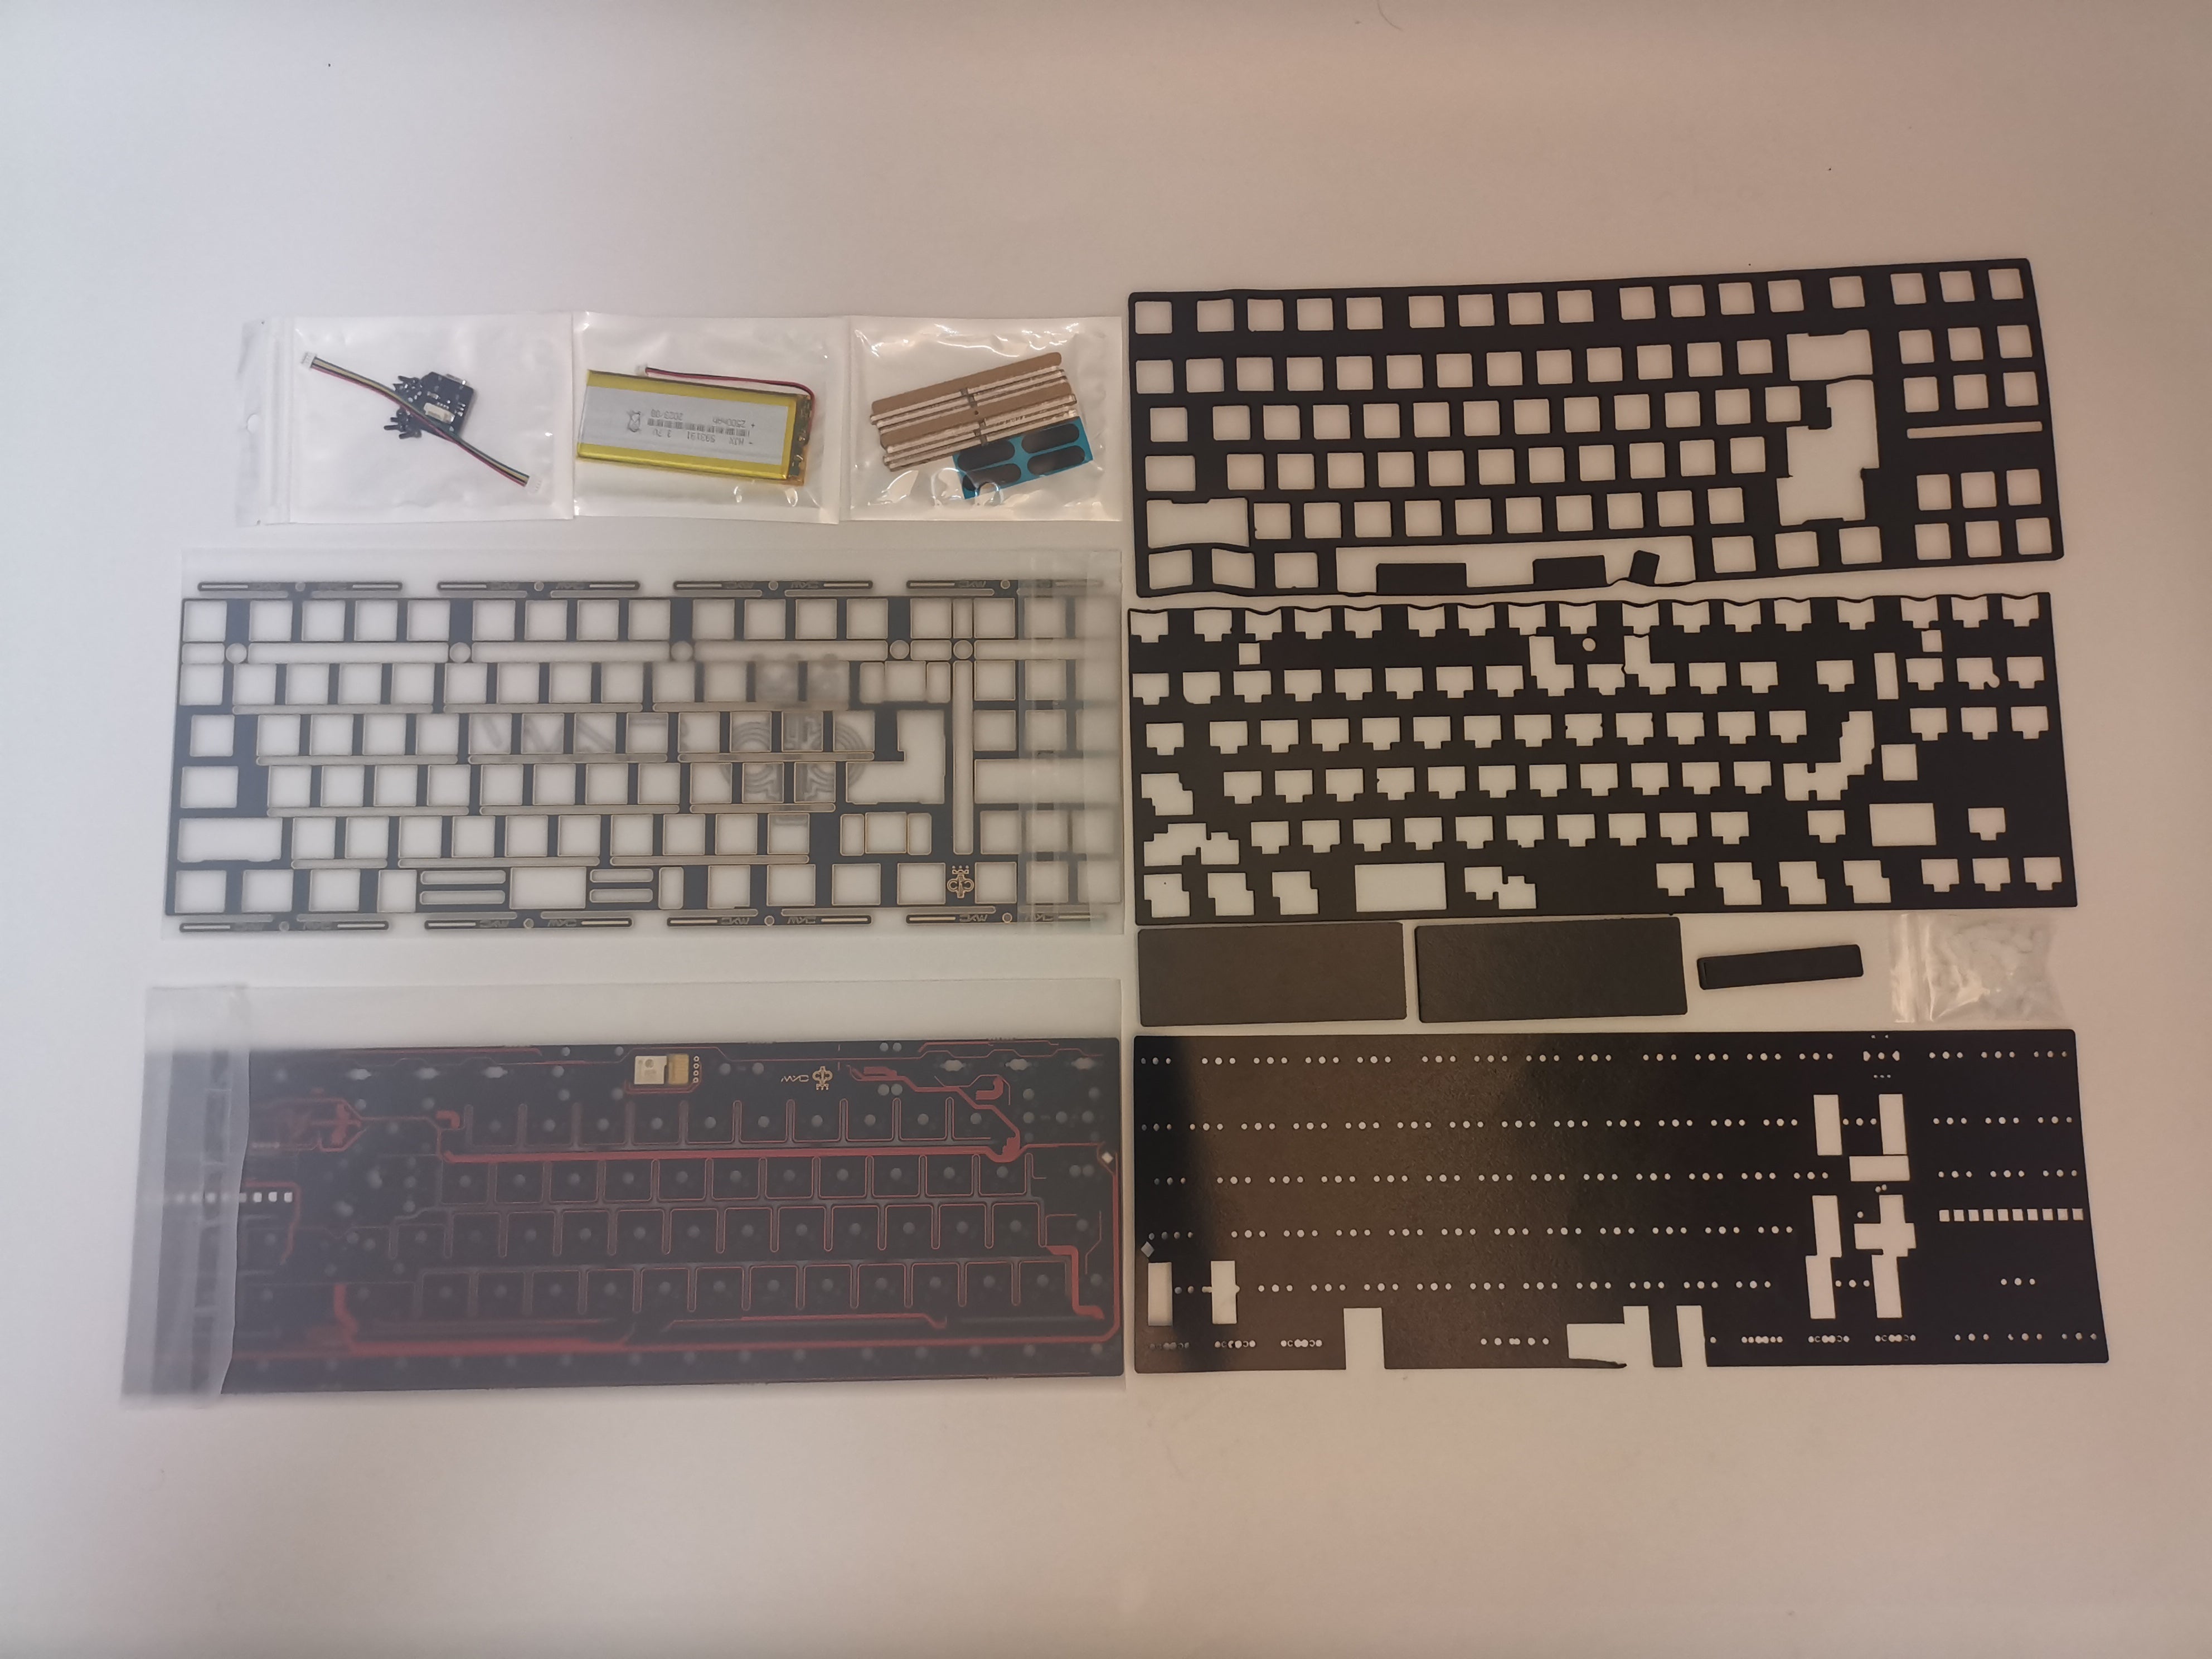 [Extra] CKW80 TKL/WKL More Than One Typing Feel Option Mechanical Keyboard Kit